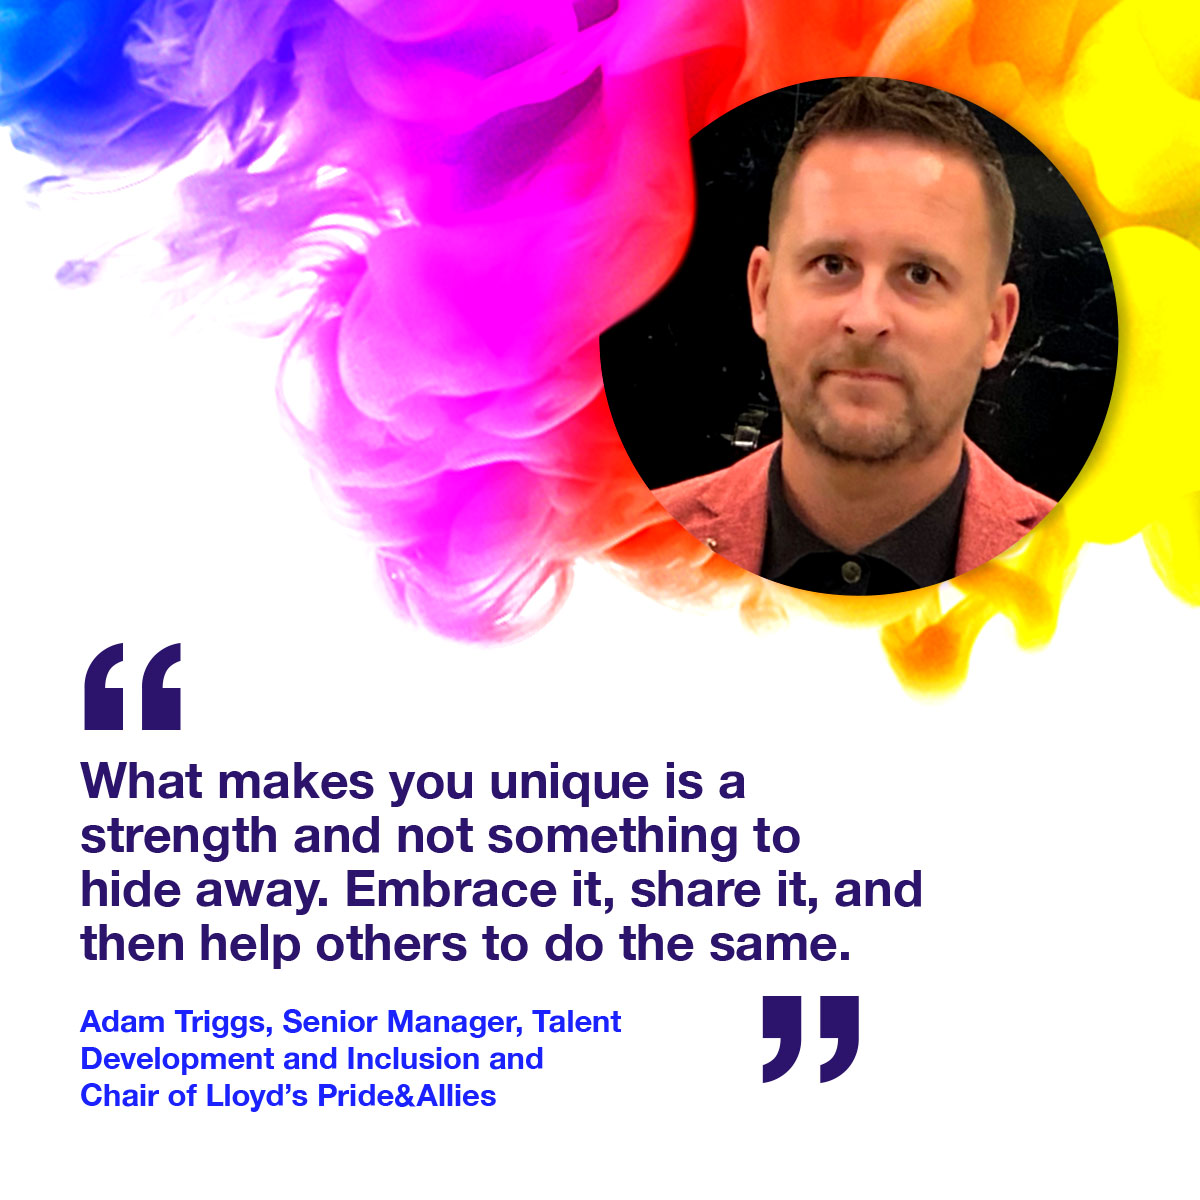 Adam Triggs says what makes you unique is a strength and not something to hide away. Embrace it, share it and then help others to do the same.